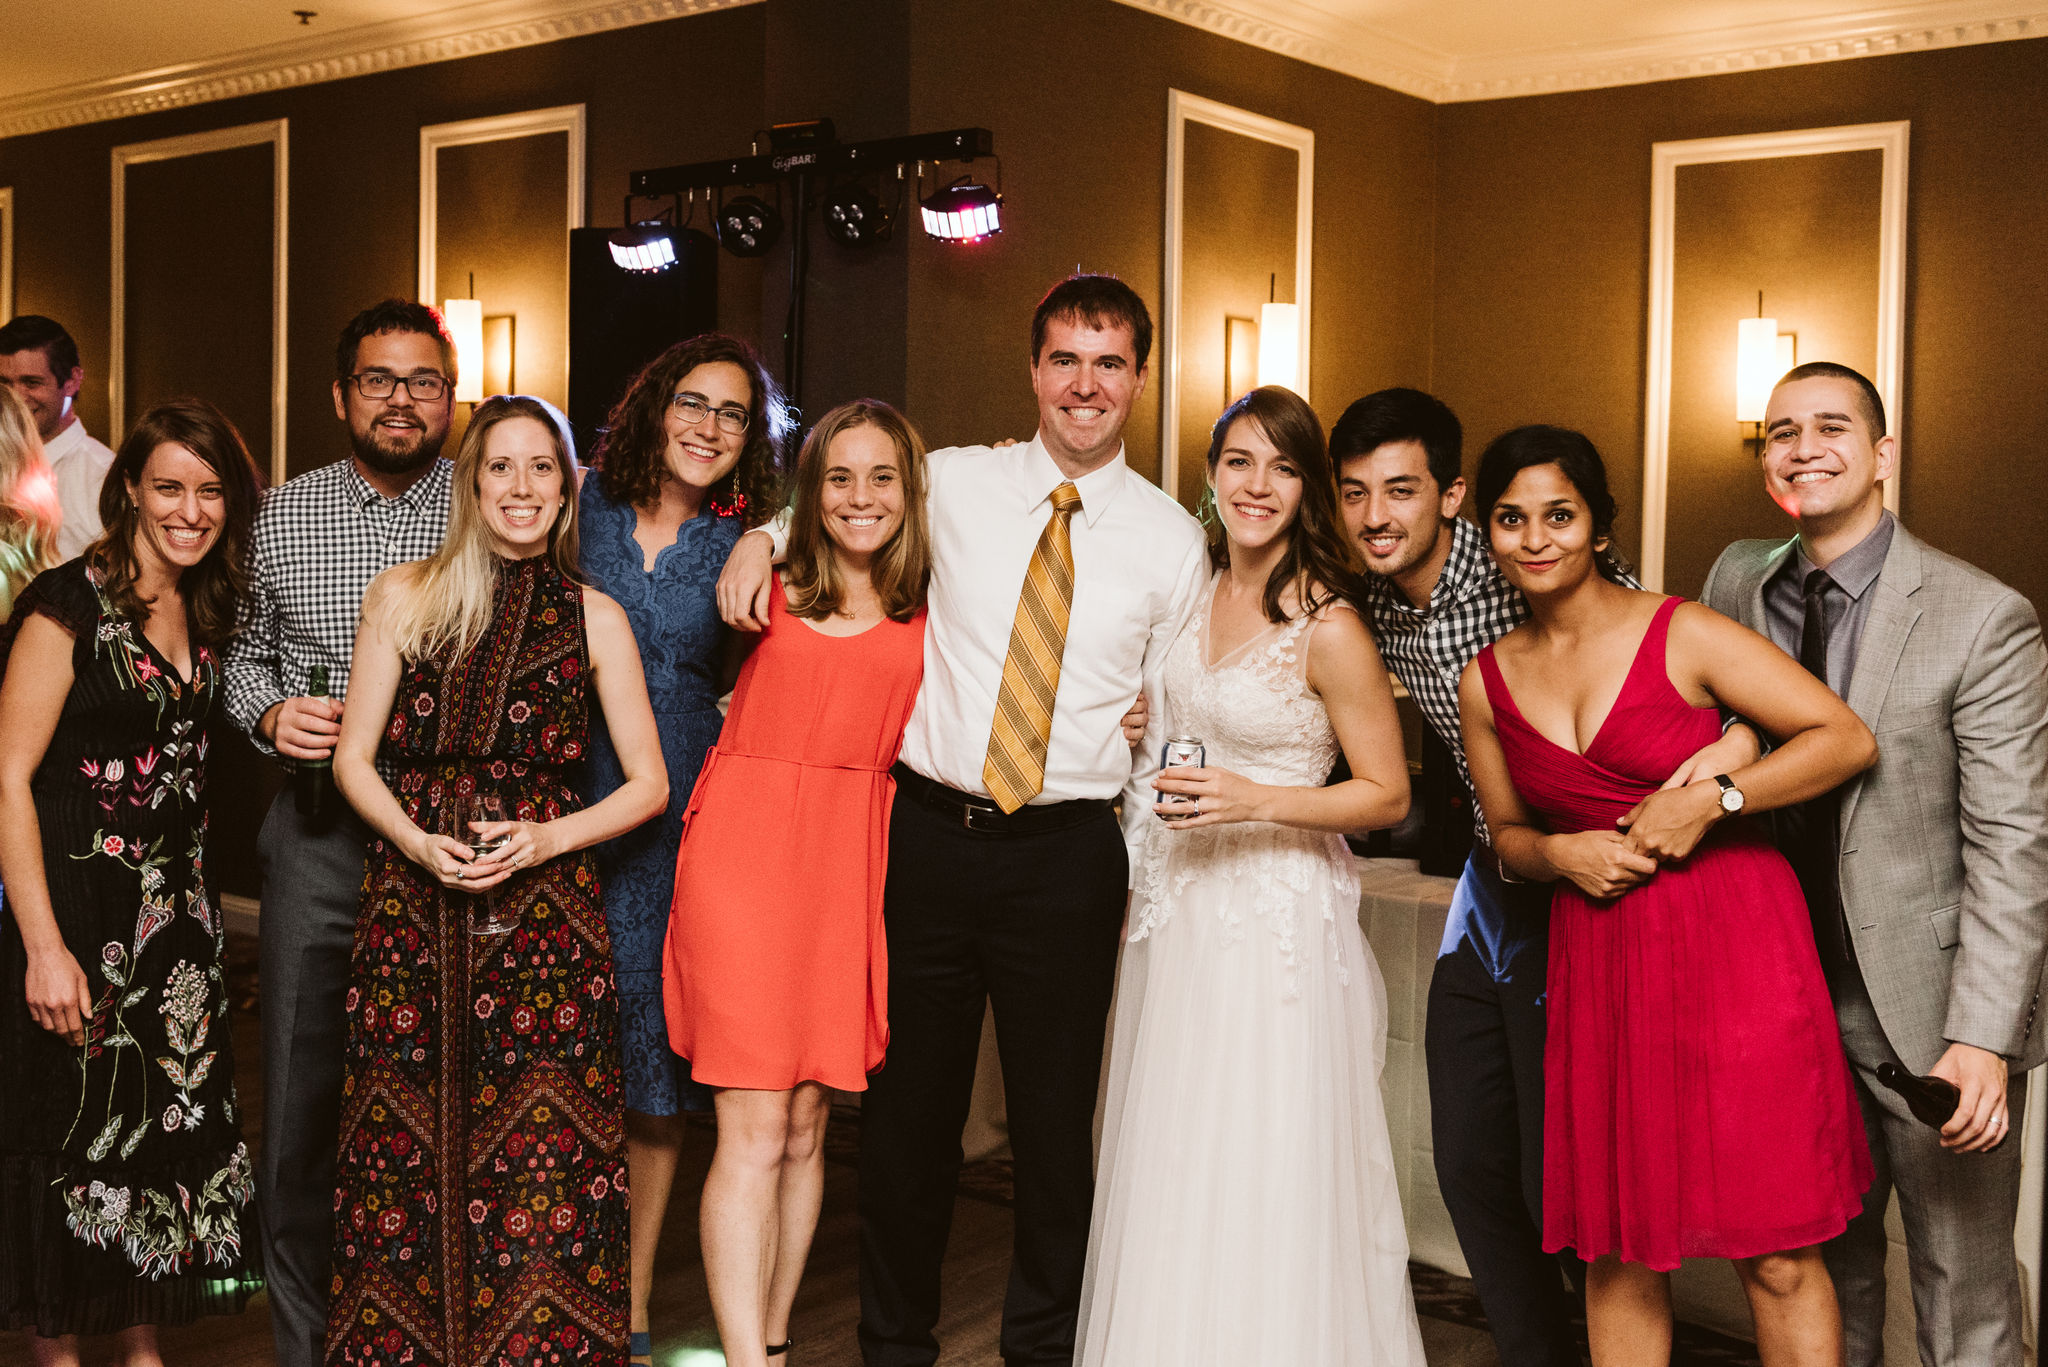  Phoenix Maryland, Baltimore Wedding Photographer, Eagle’s Nest Country Club, Classic, Romantic, Portrait of Bride with Friends at Reception 